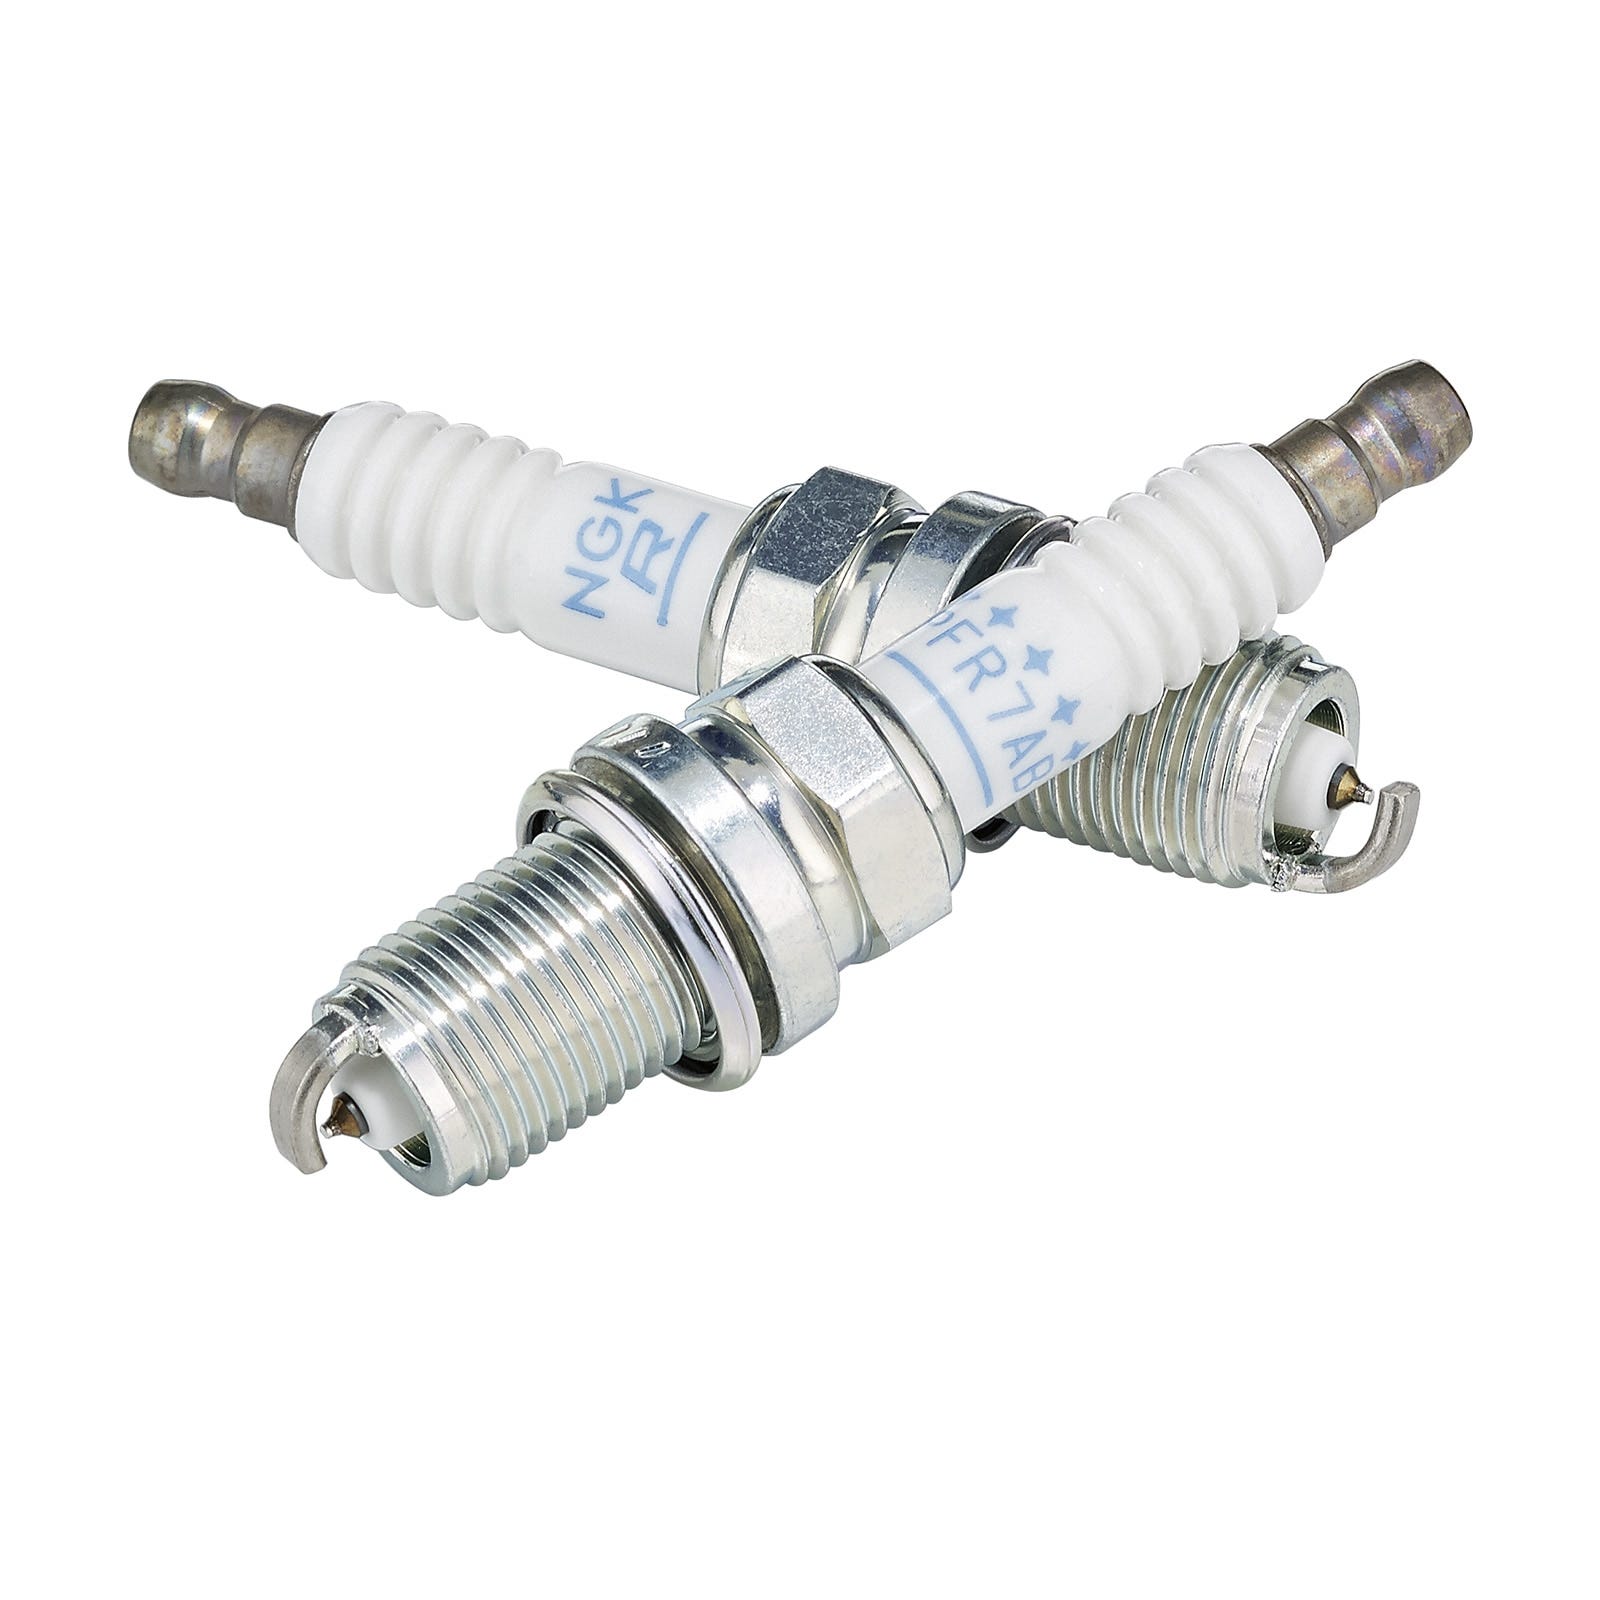 NGK Spark Plugs - 512059552 - The Parts Lodge